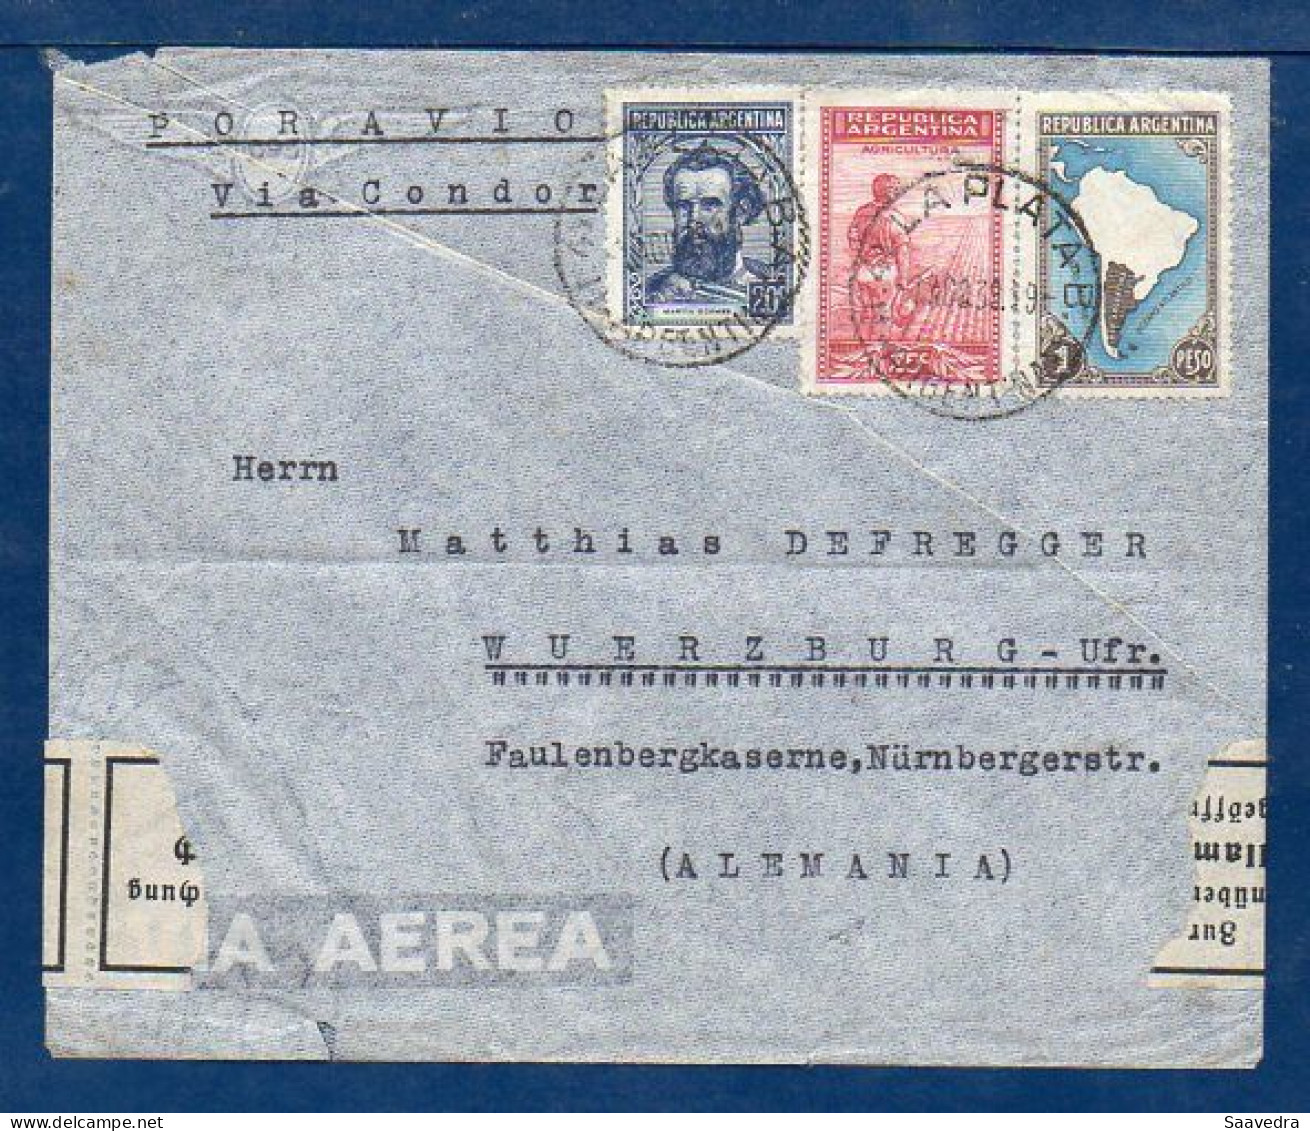 Argentina To Germany, 1939, Last Flight To Europe Via Condor, Flight L-480, Currency Censor Tape, SEE DESCRIPTION  (040) - Luchtpost